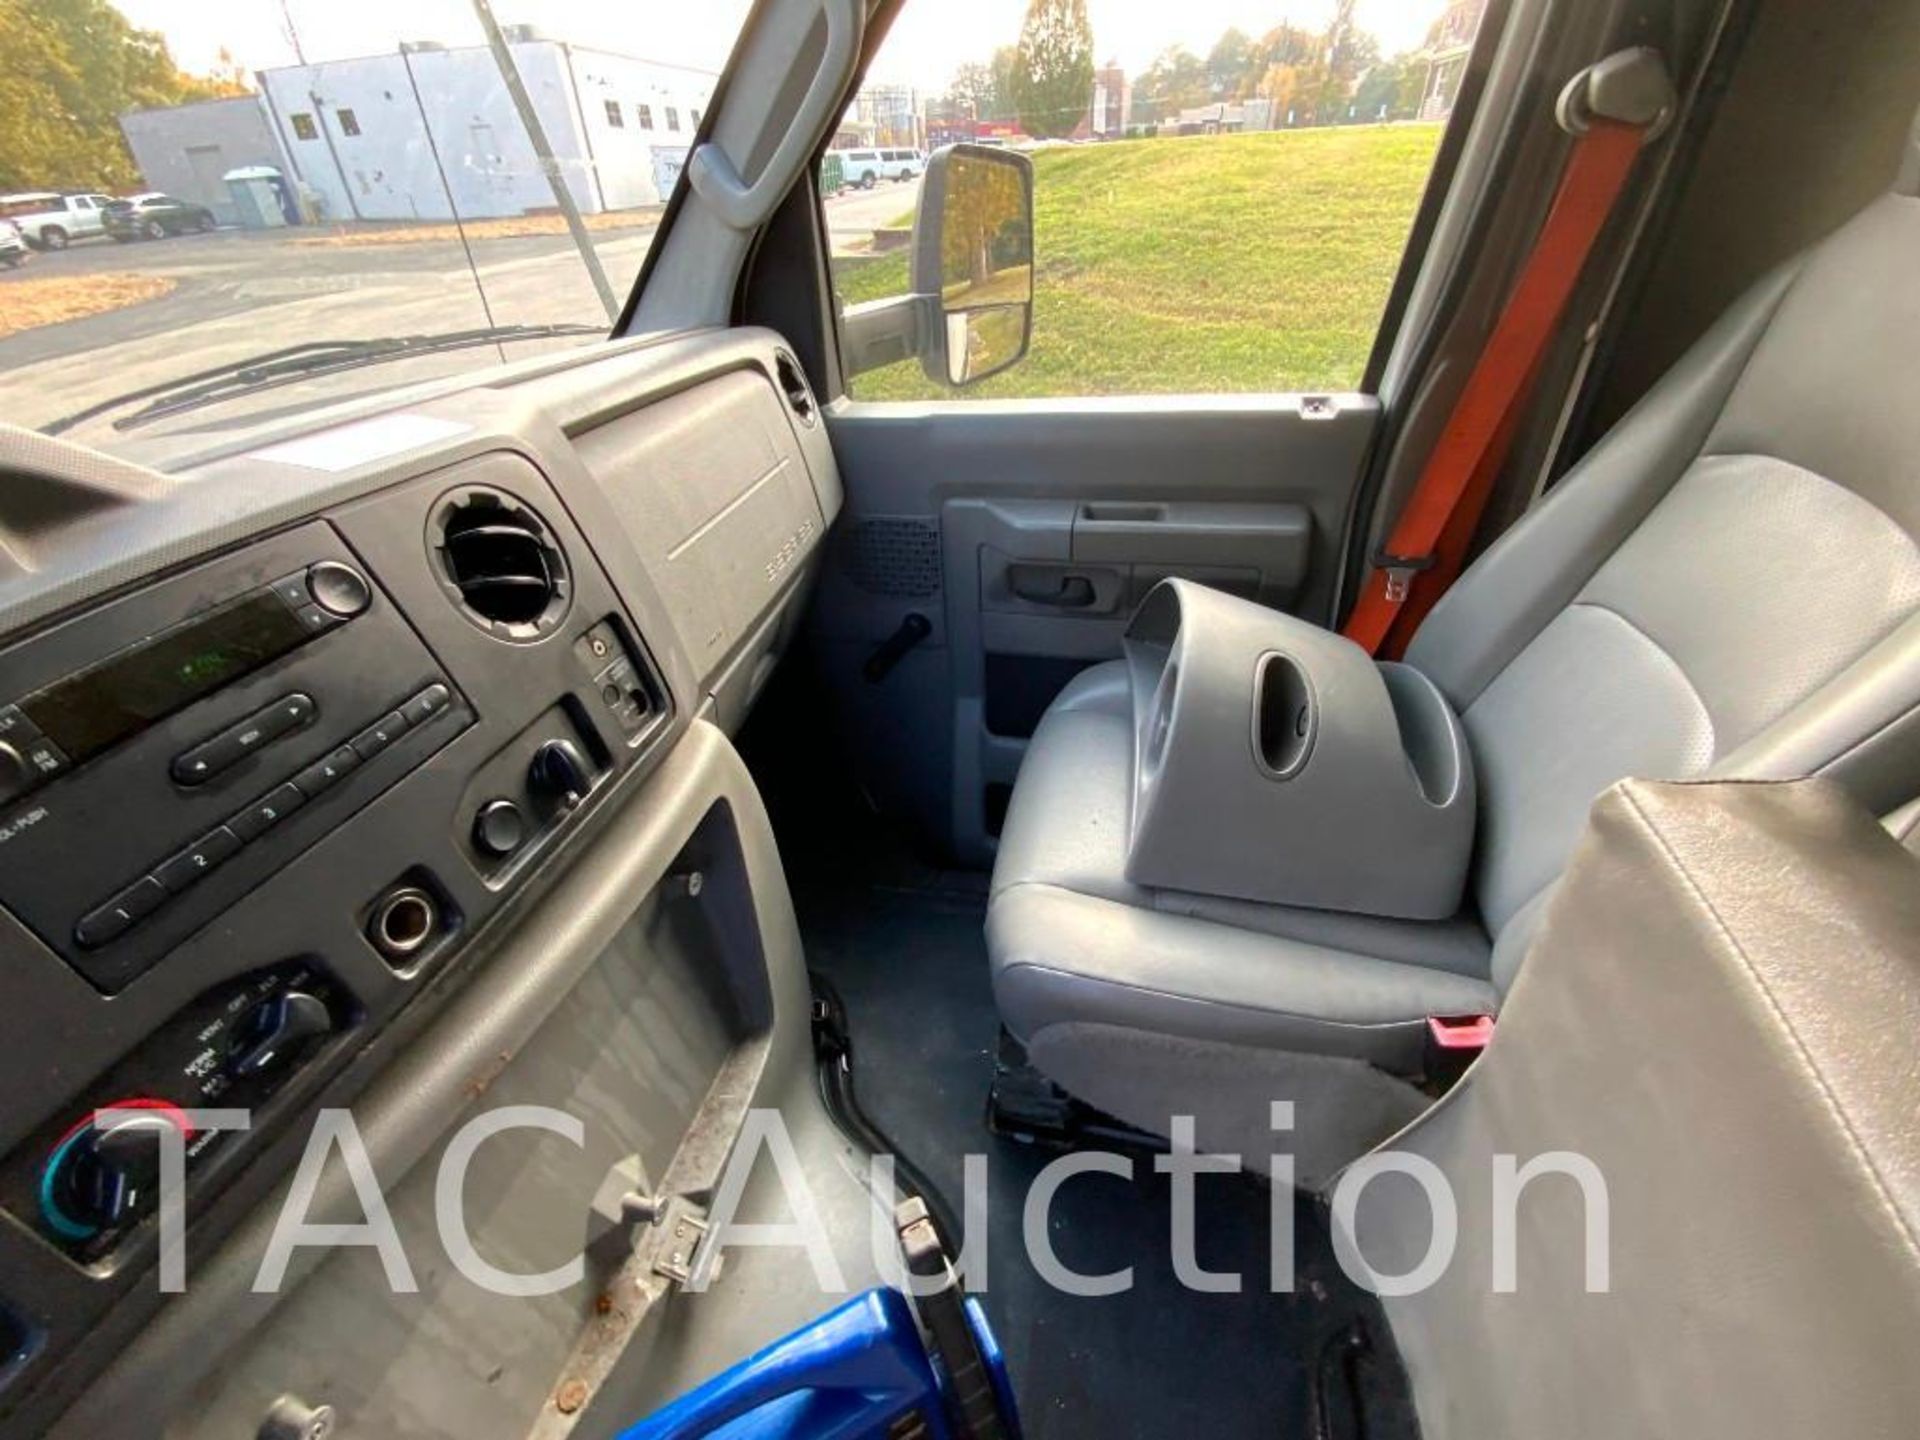 2015 Ford E-350 Box Truck - Image 16 of 51